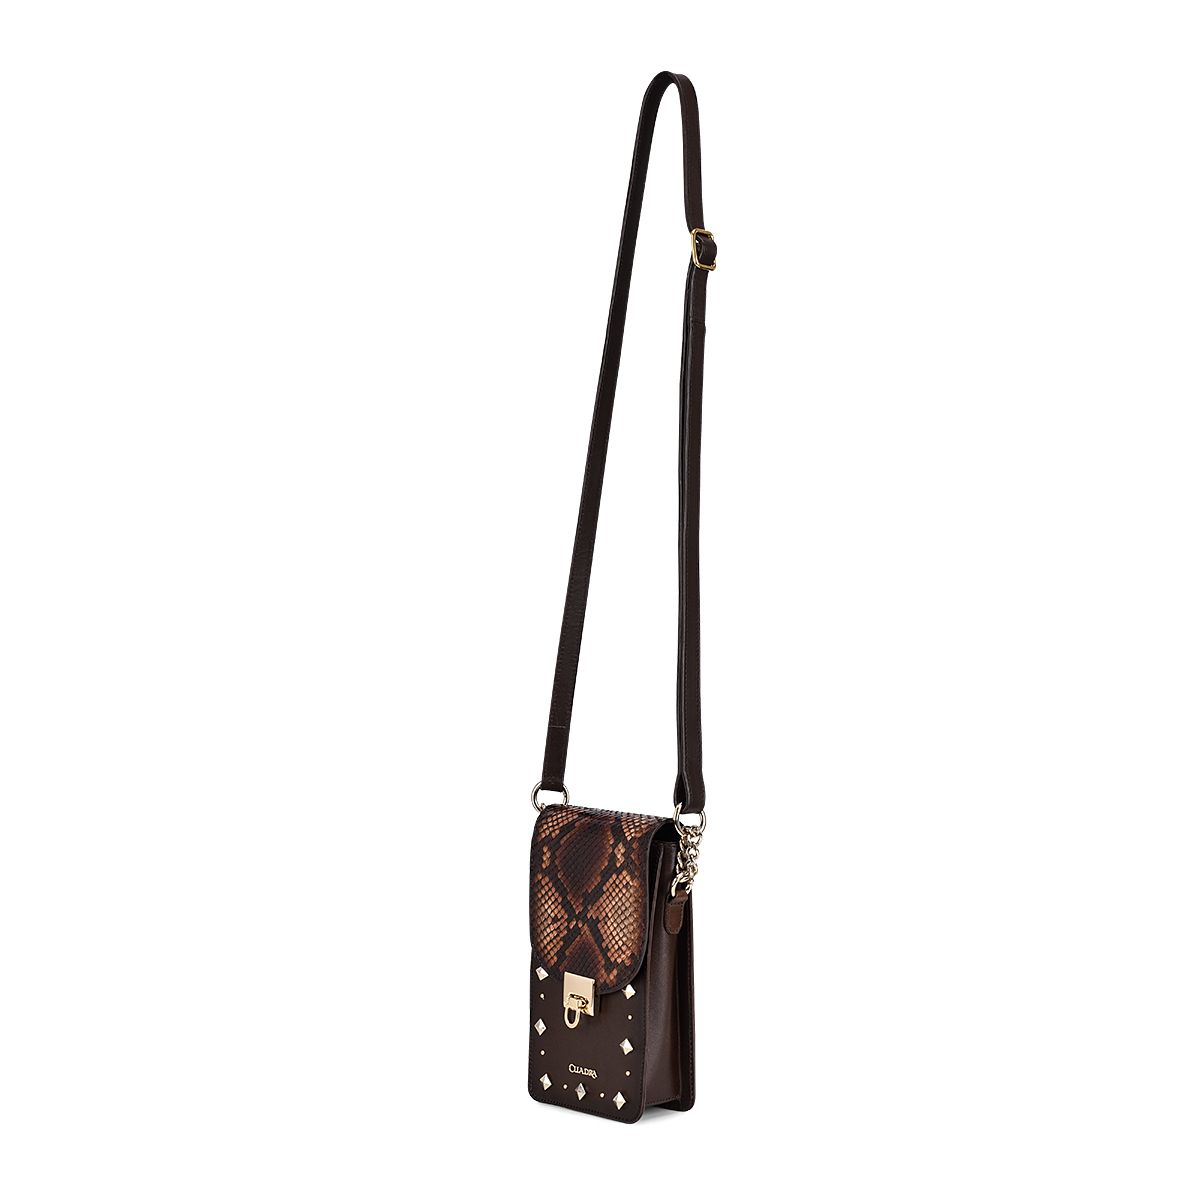 Brown exotic leather cell phone bag